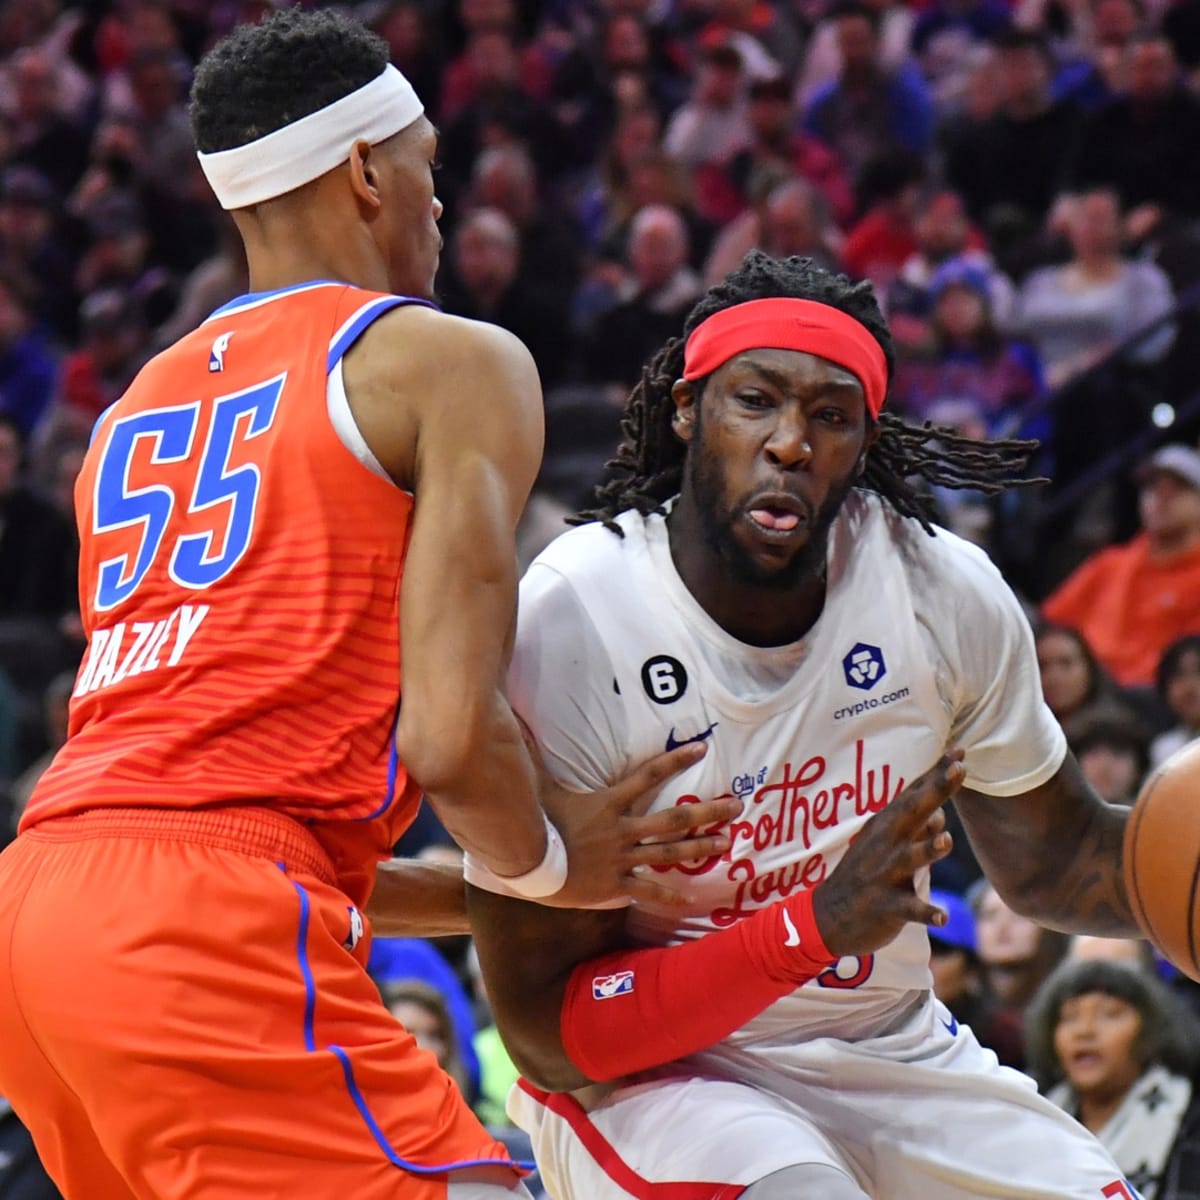 Report: Montrezl Harrell declines player option with Sixers